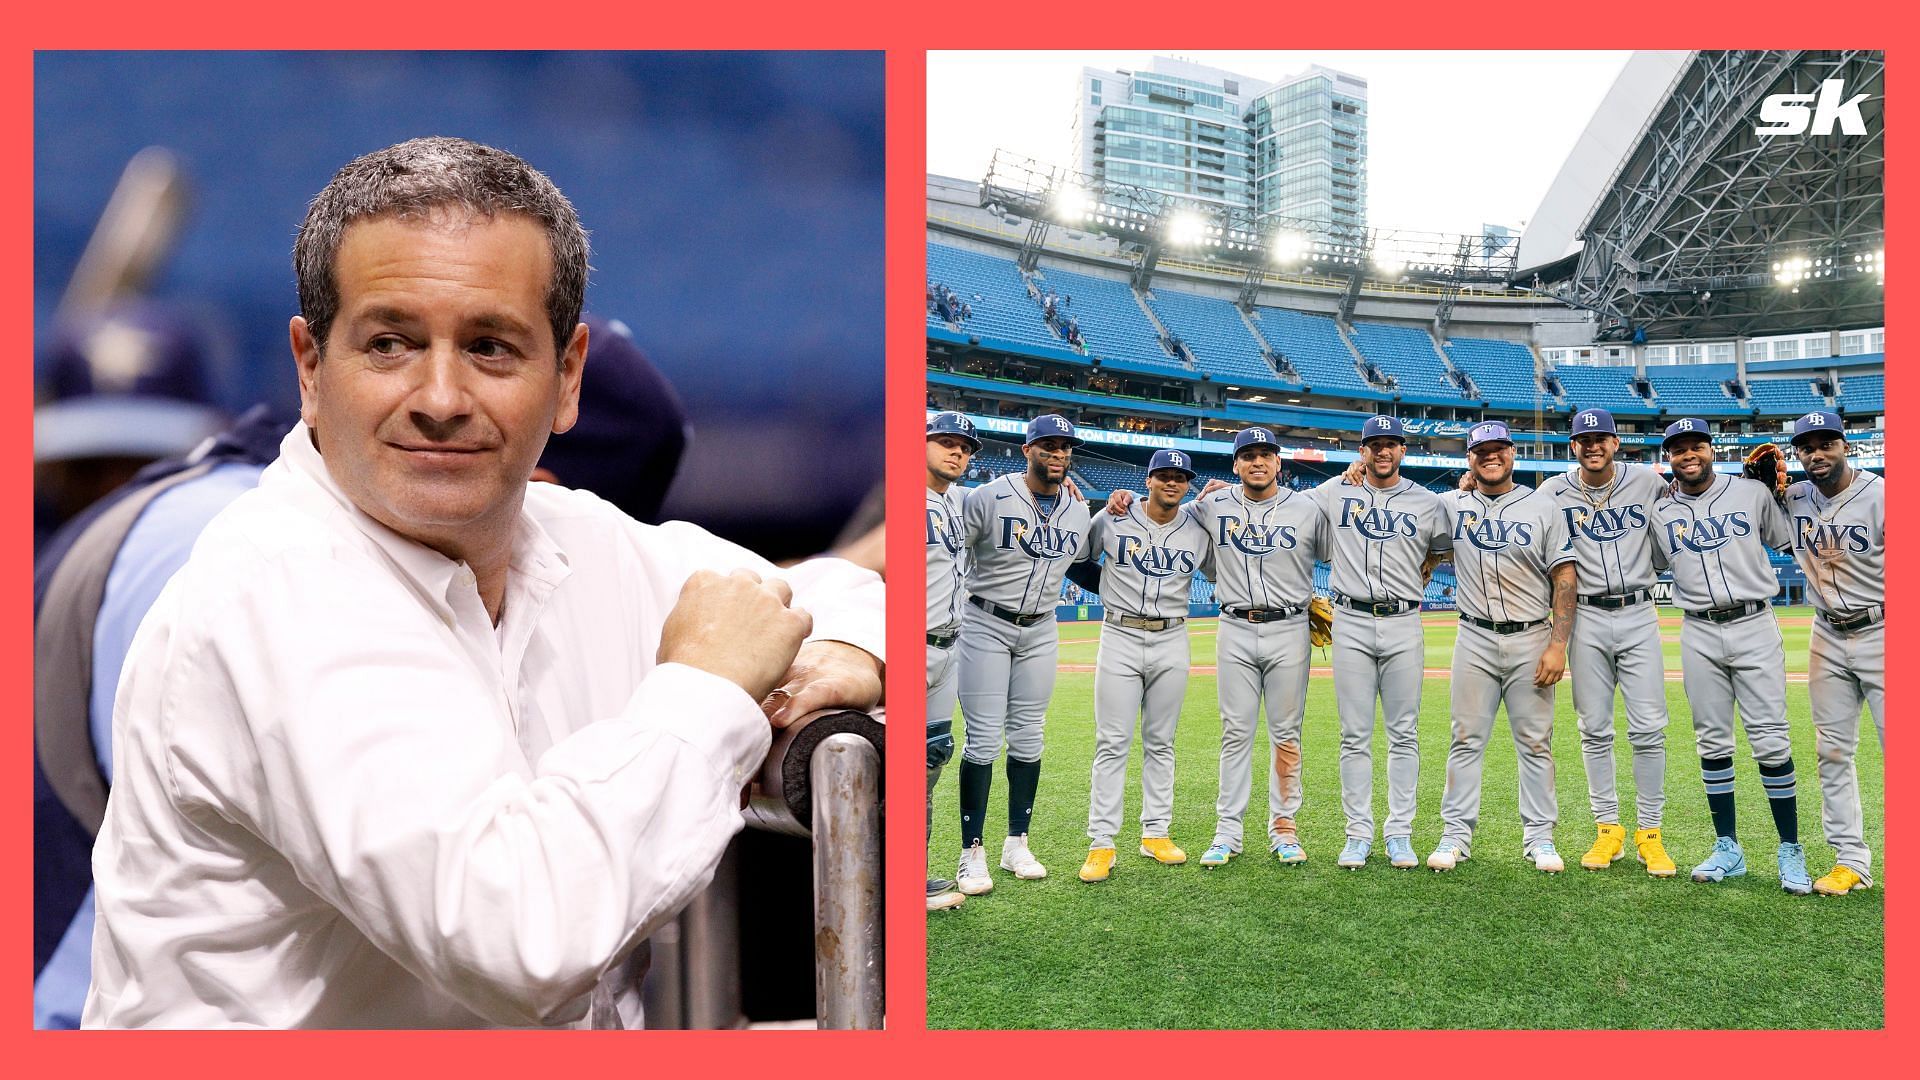 Tampa Bay Rays owner Stuart Sternberg and team